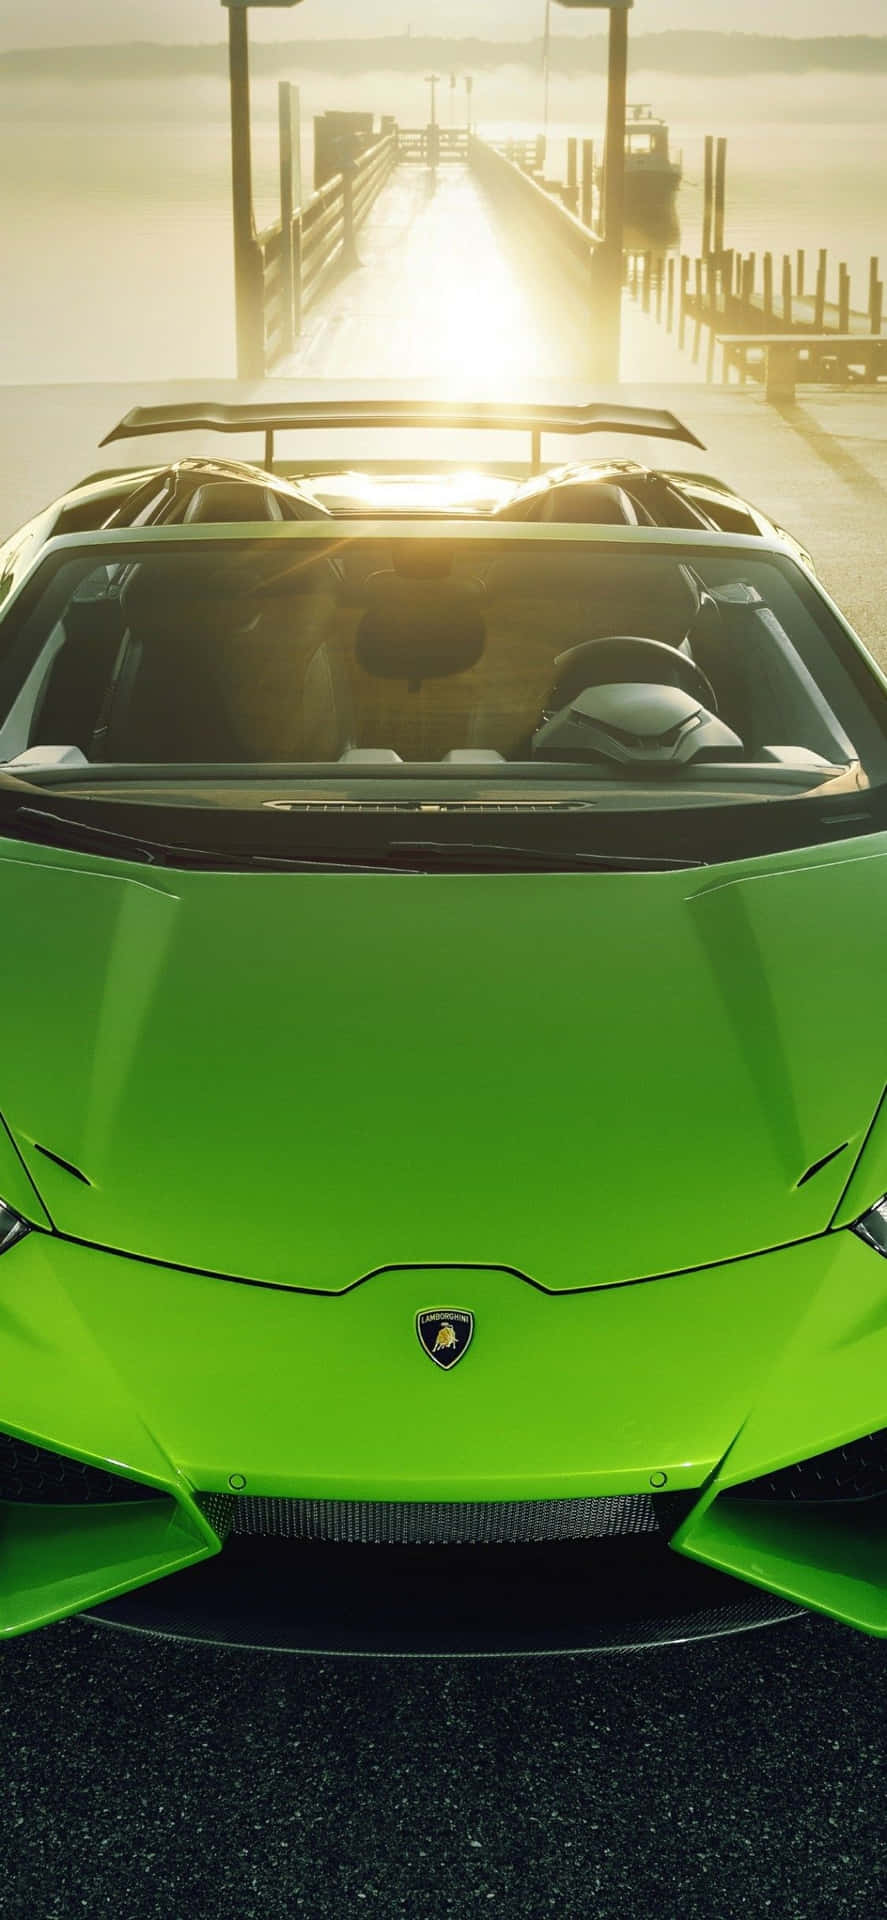 Take your ride to new levels with the limited edition green lamborghini iphone. Wallpaper